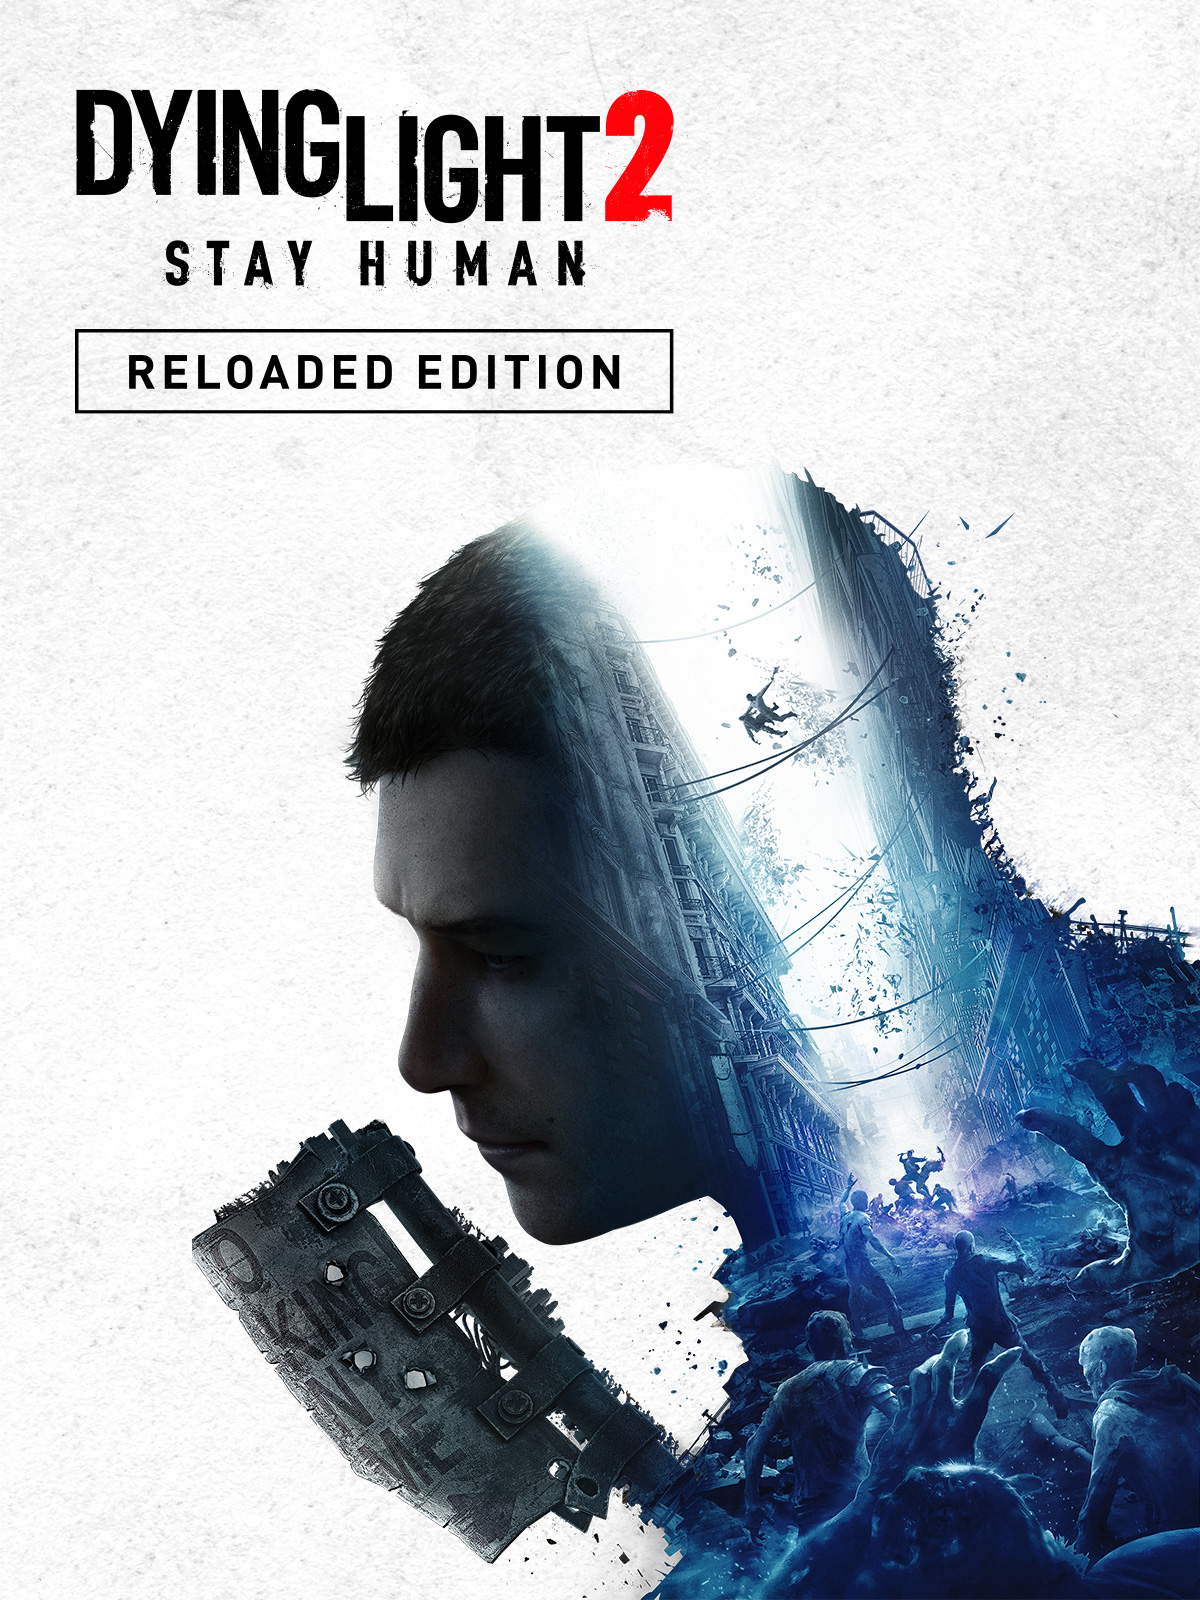 Dying Light 2 Stay Human: Reloaded Edition (PC Digital Download) $21.80